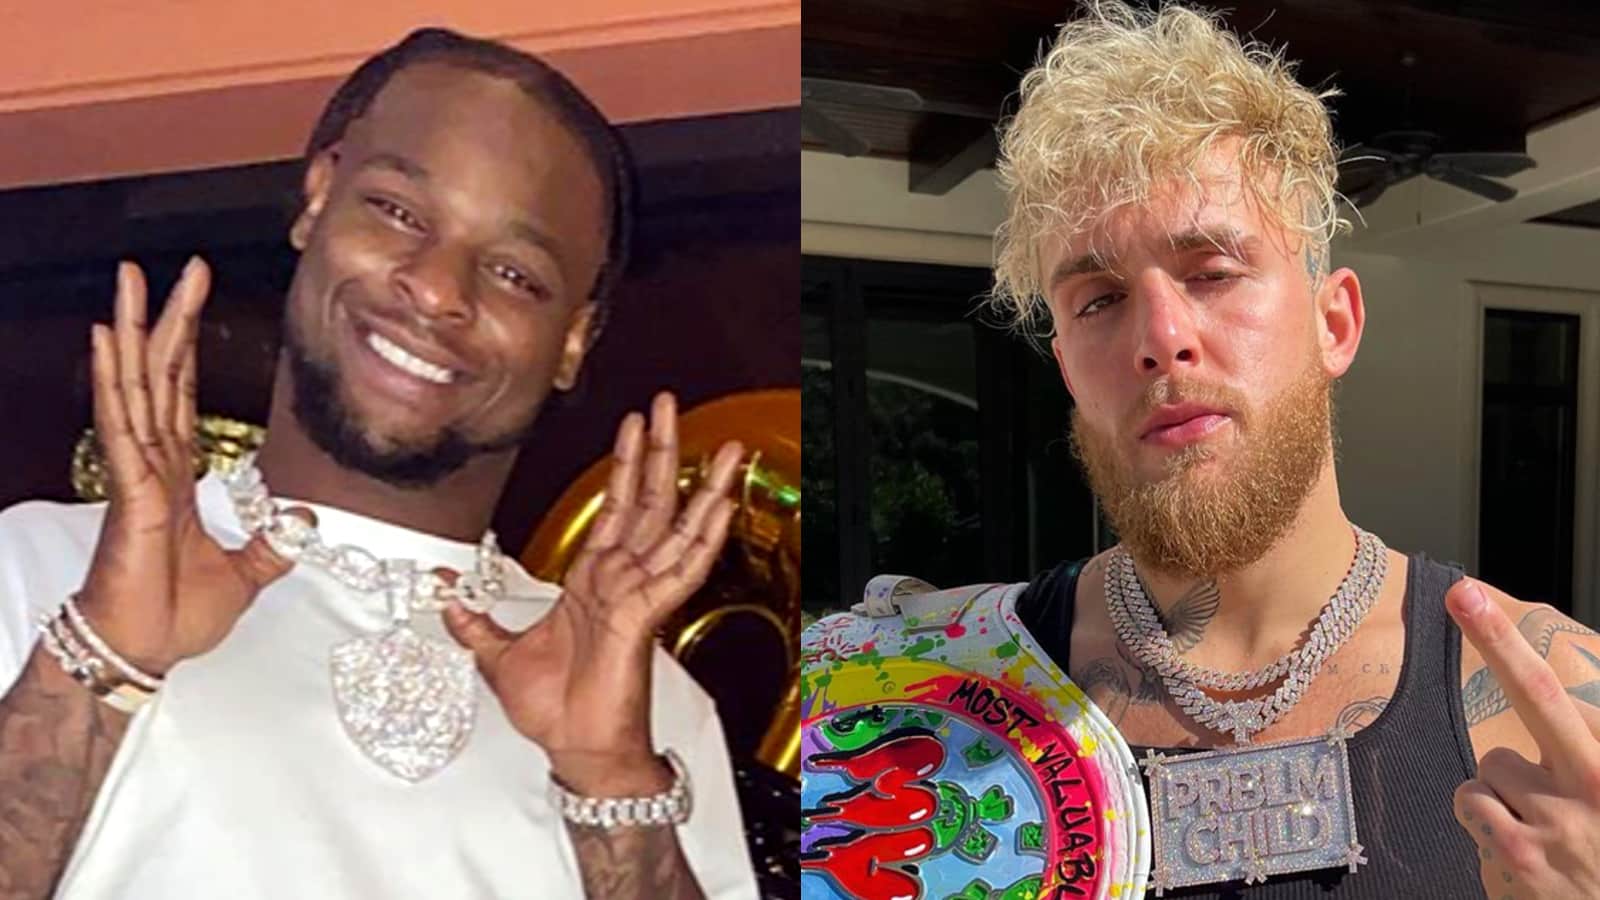 Le'Veon Bell next to Jake Paul